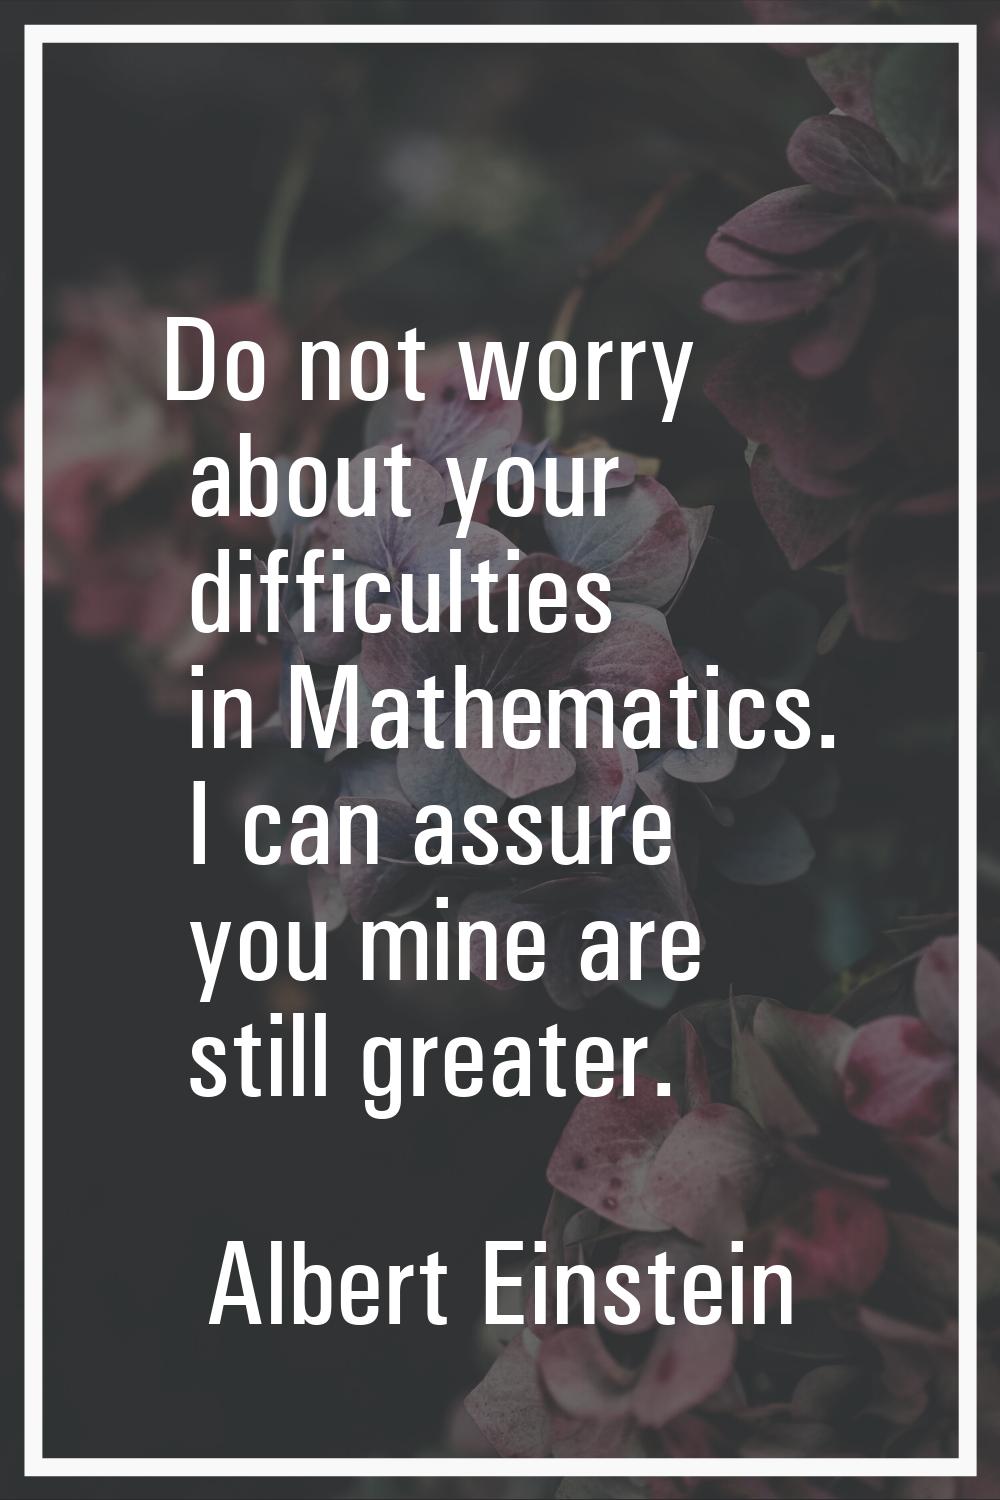 Do not worry about your difficulties in Mathematics. I can assure you mine are still greater.